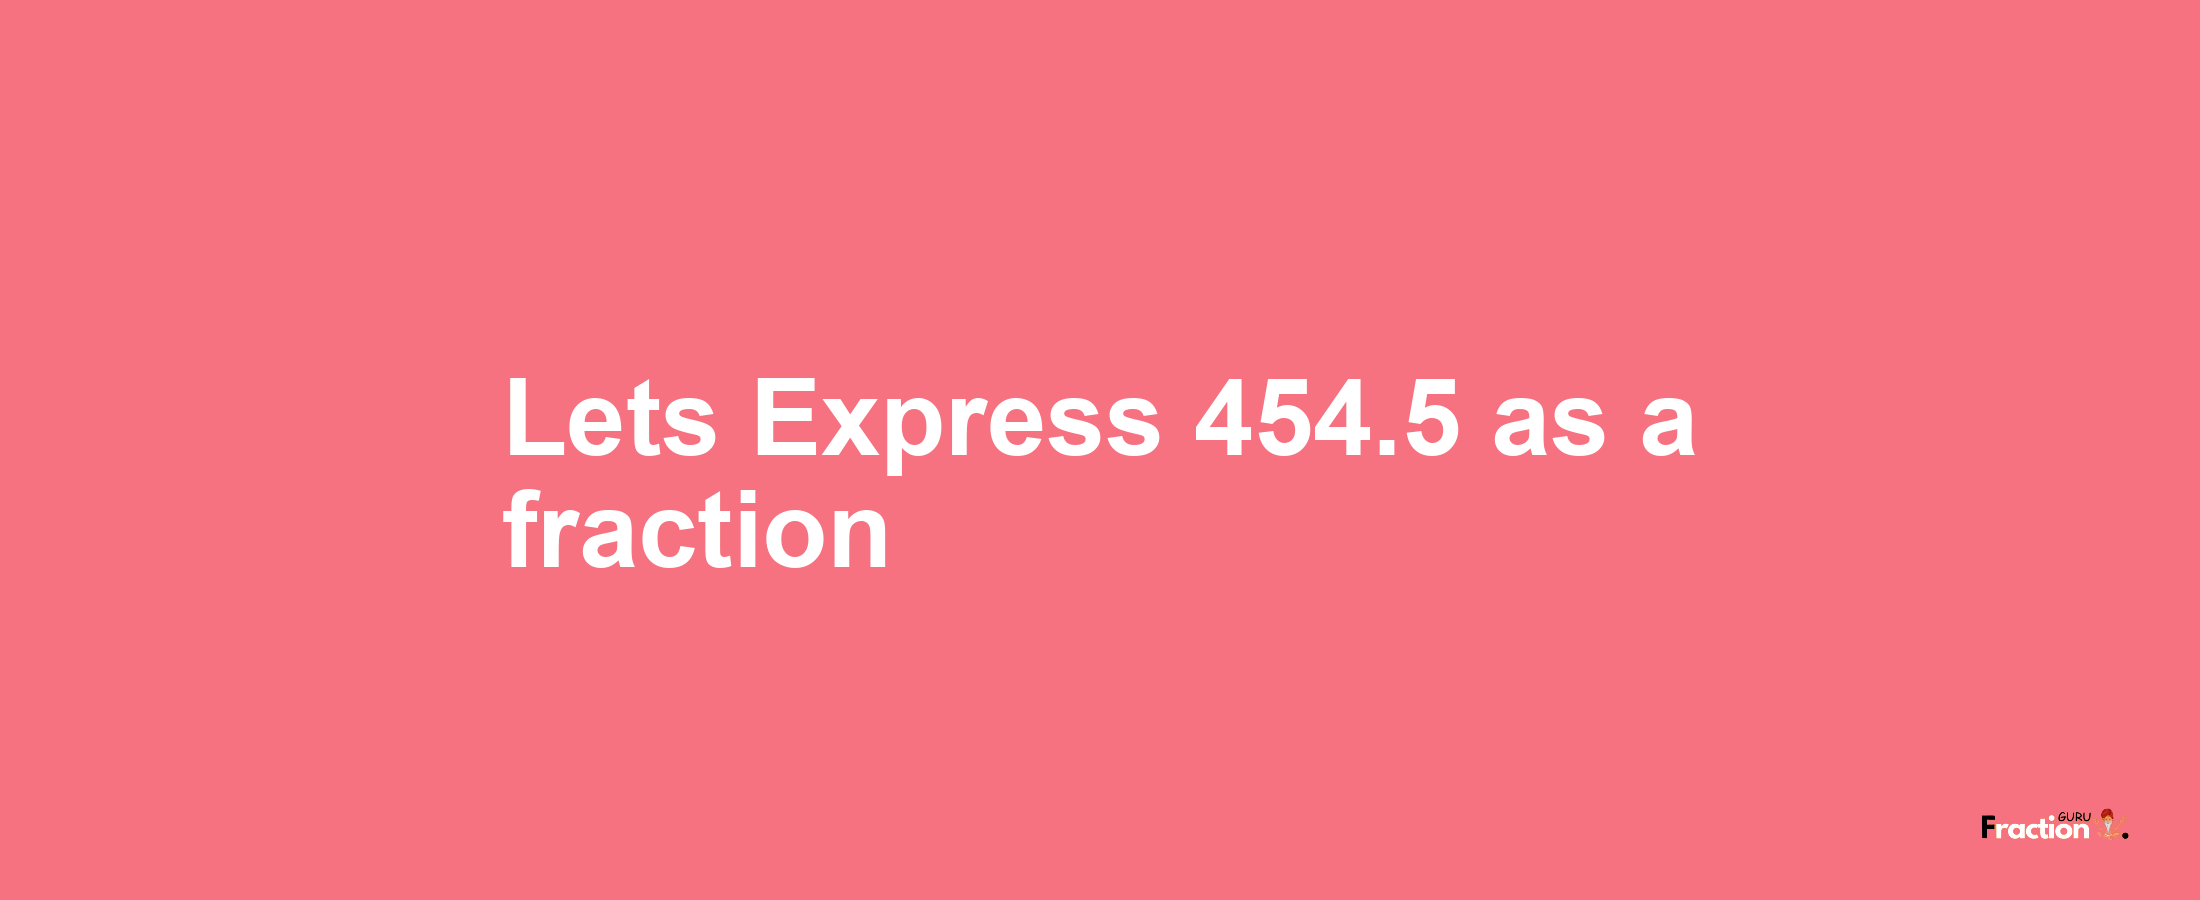 Lets Express 454.5 as afraction